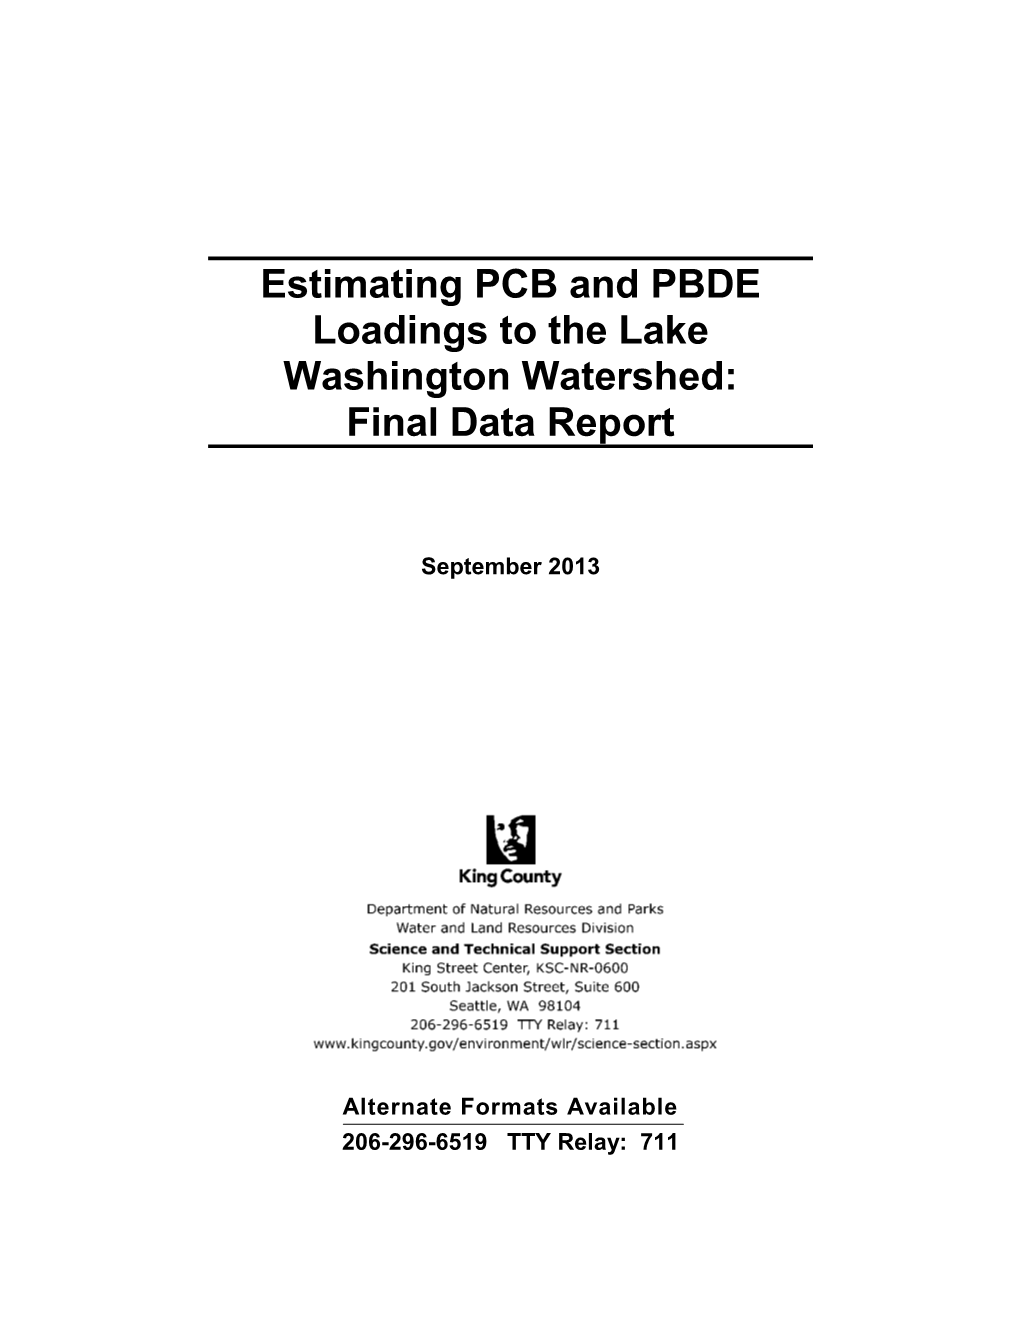 Estimating PCB and PBDE Loadings to the Lake Washington Watershed: Final Data Report